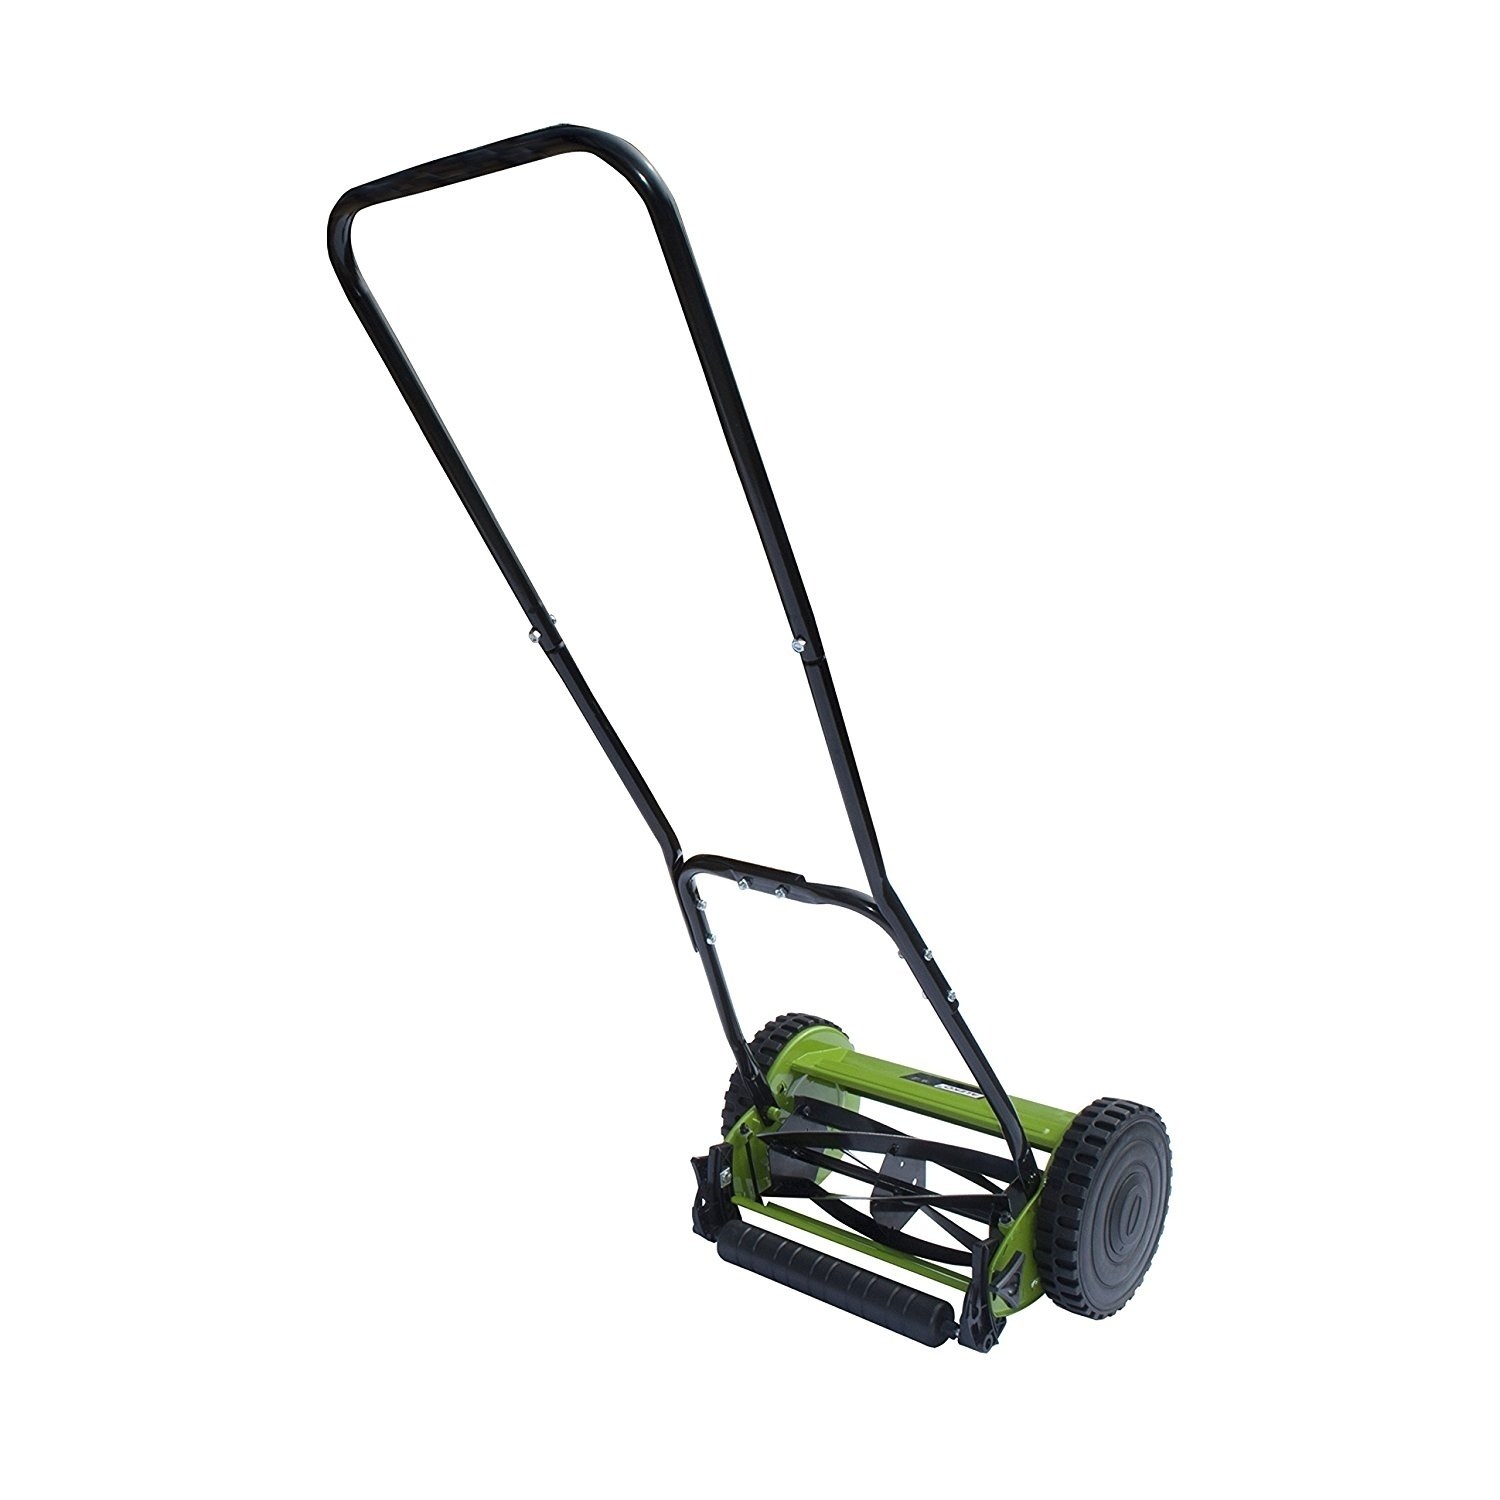 ALEKO Hand Push Lawn Mower with Adjustable Cutting Height - 5-Blade - 12-Inch - image 2 of 5